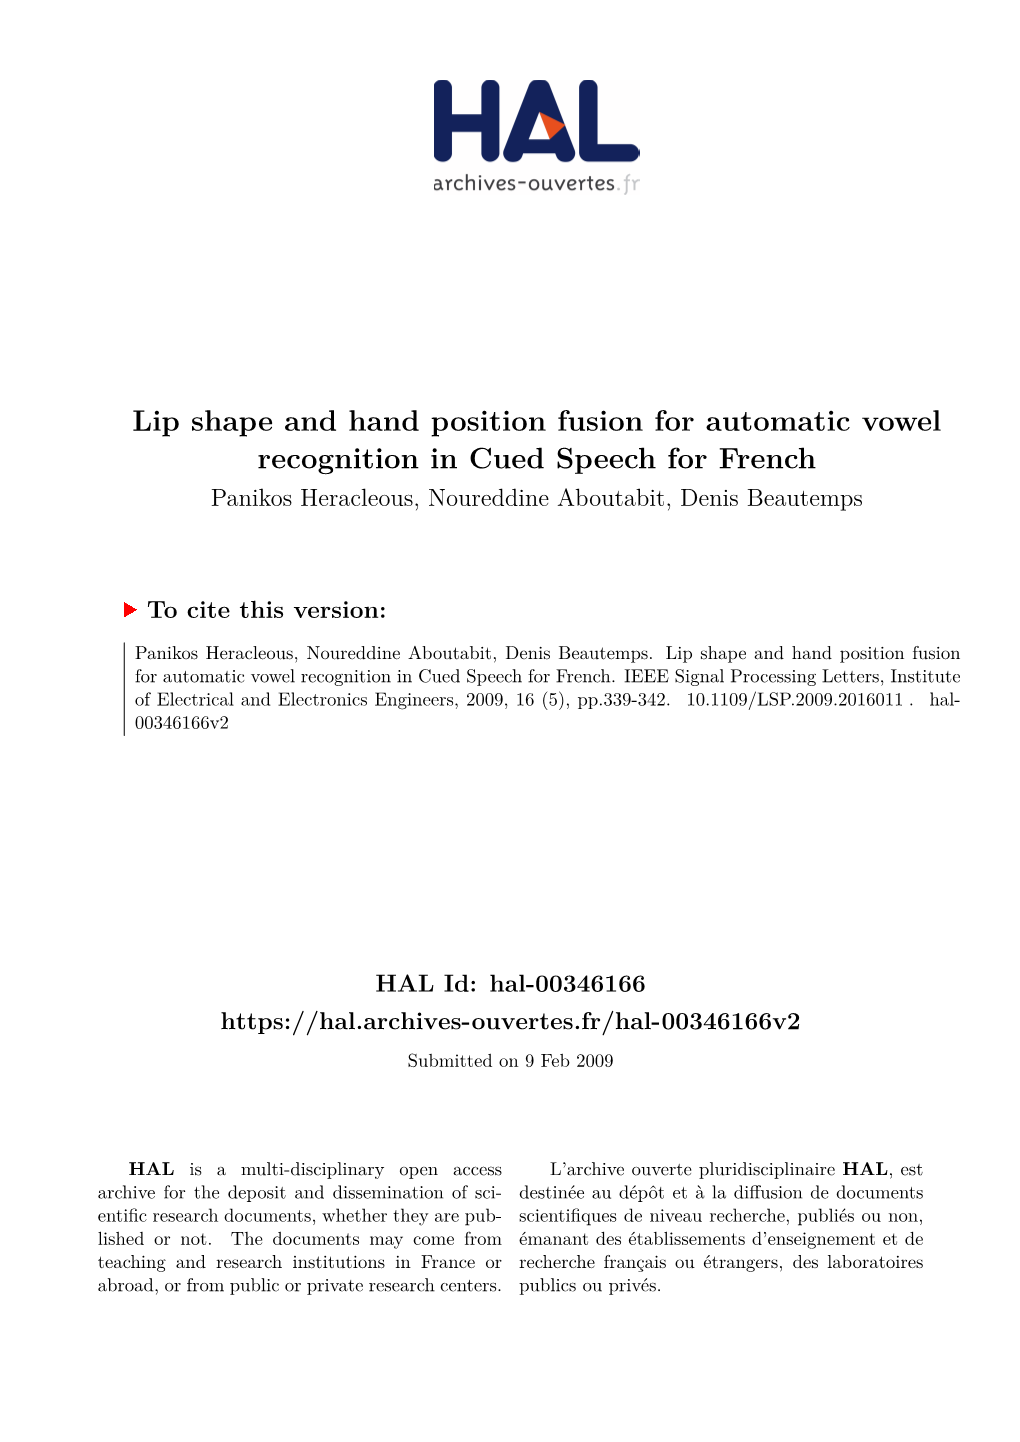 Lip Shape and Hand Position Fusion for Automatic Vowel Recognition in Cued Speech for French Panikos Heracleous, Noureddine Aboutabit, Denis Beautemps